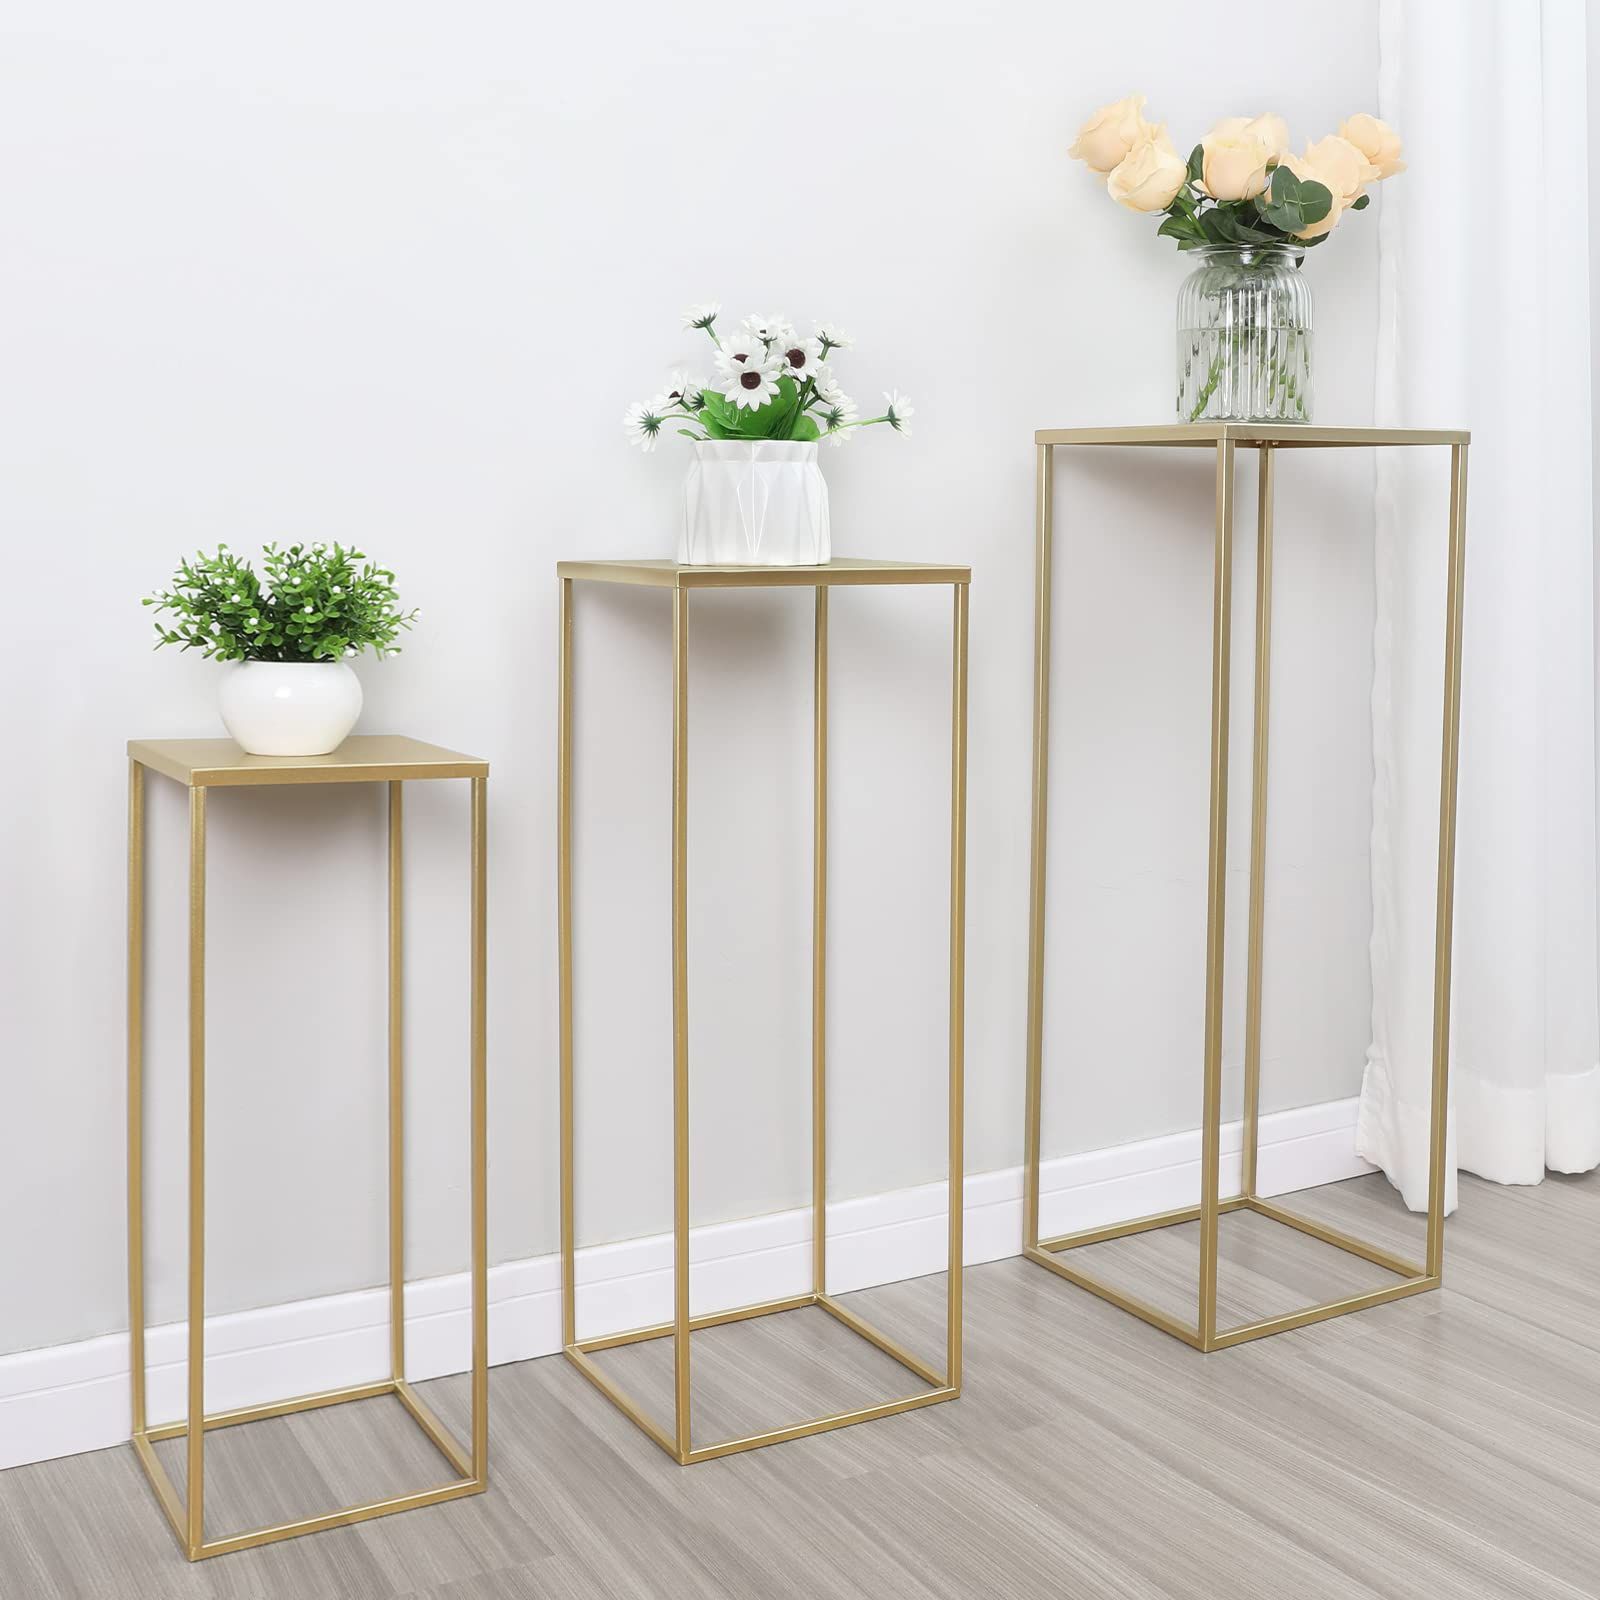 Recent Set Of 3 Plant Stands Within Amazon : Set Of 3 Metal Plant Stand Golden Nesting Display End Table  Tall Pedestal Cylinder Rack, Indoor Outdoor Flower Holder Corner Planter  Pot Rack For Parties Home Decor, Patio Weddings Ceremony : (View 3 of 10)